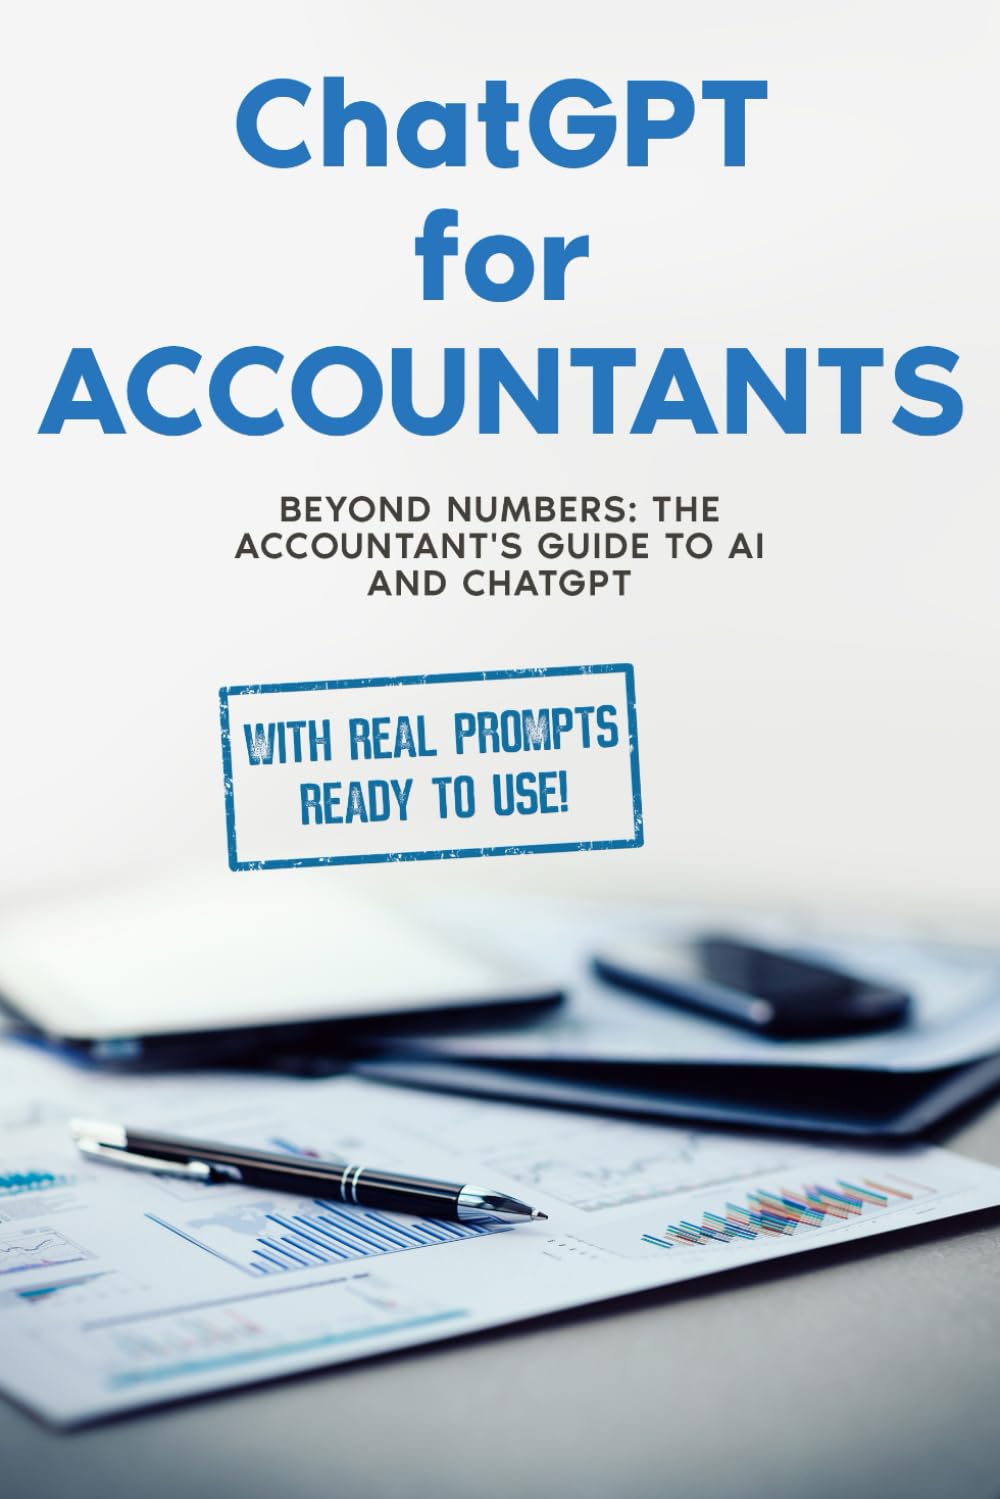 ChatGPT for Accountants: BEYOND NUMBERS: The Accountant’s Guide to AI and ChatGPT